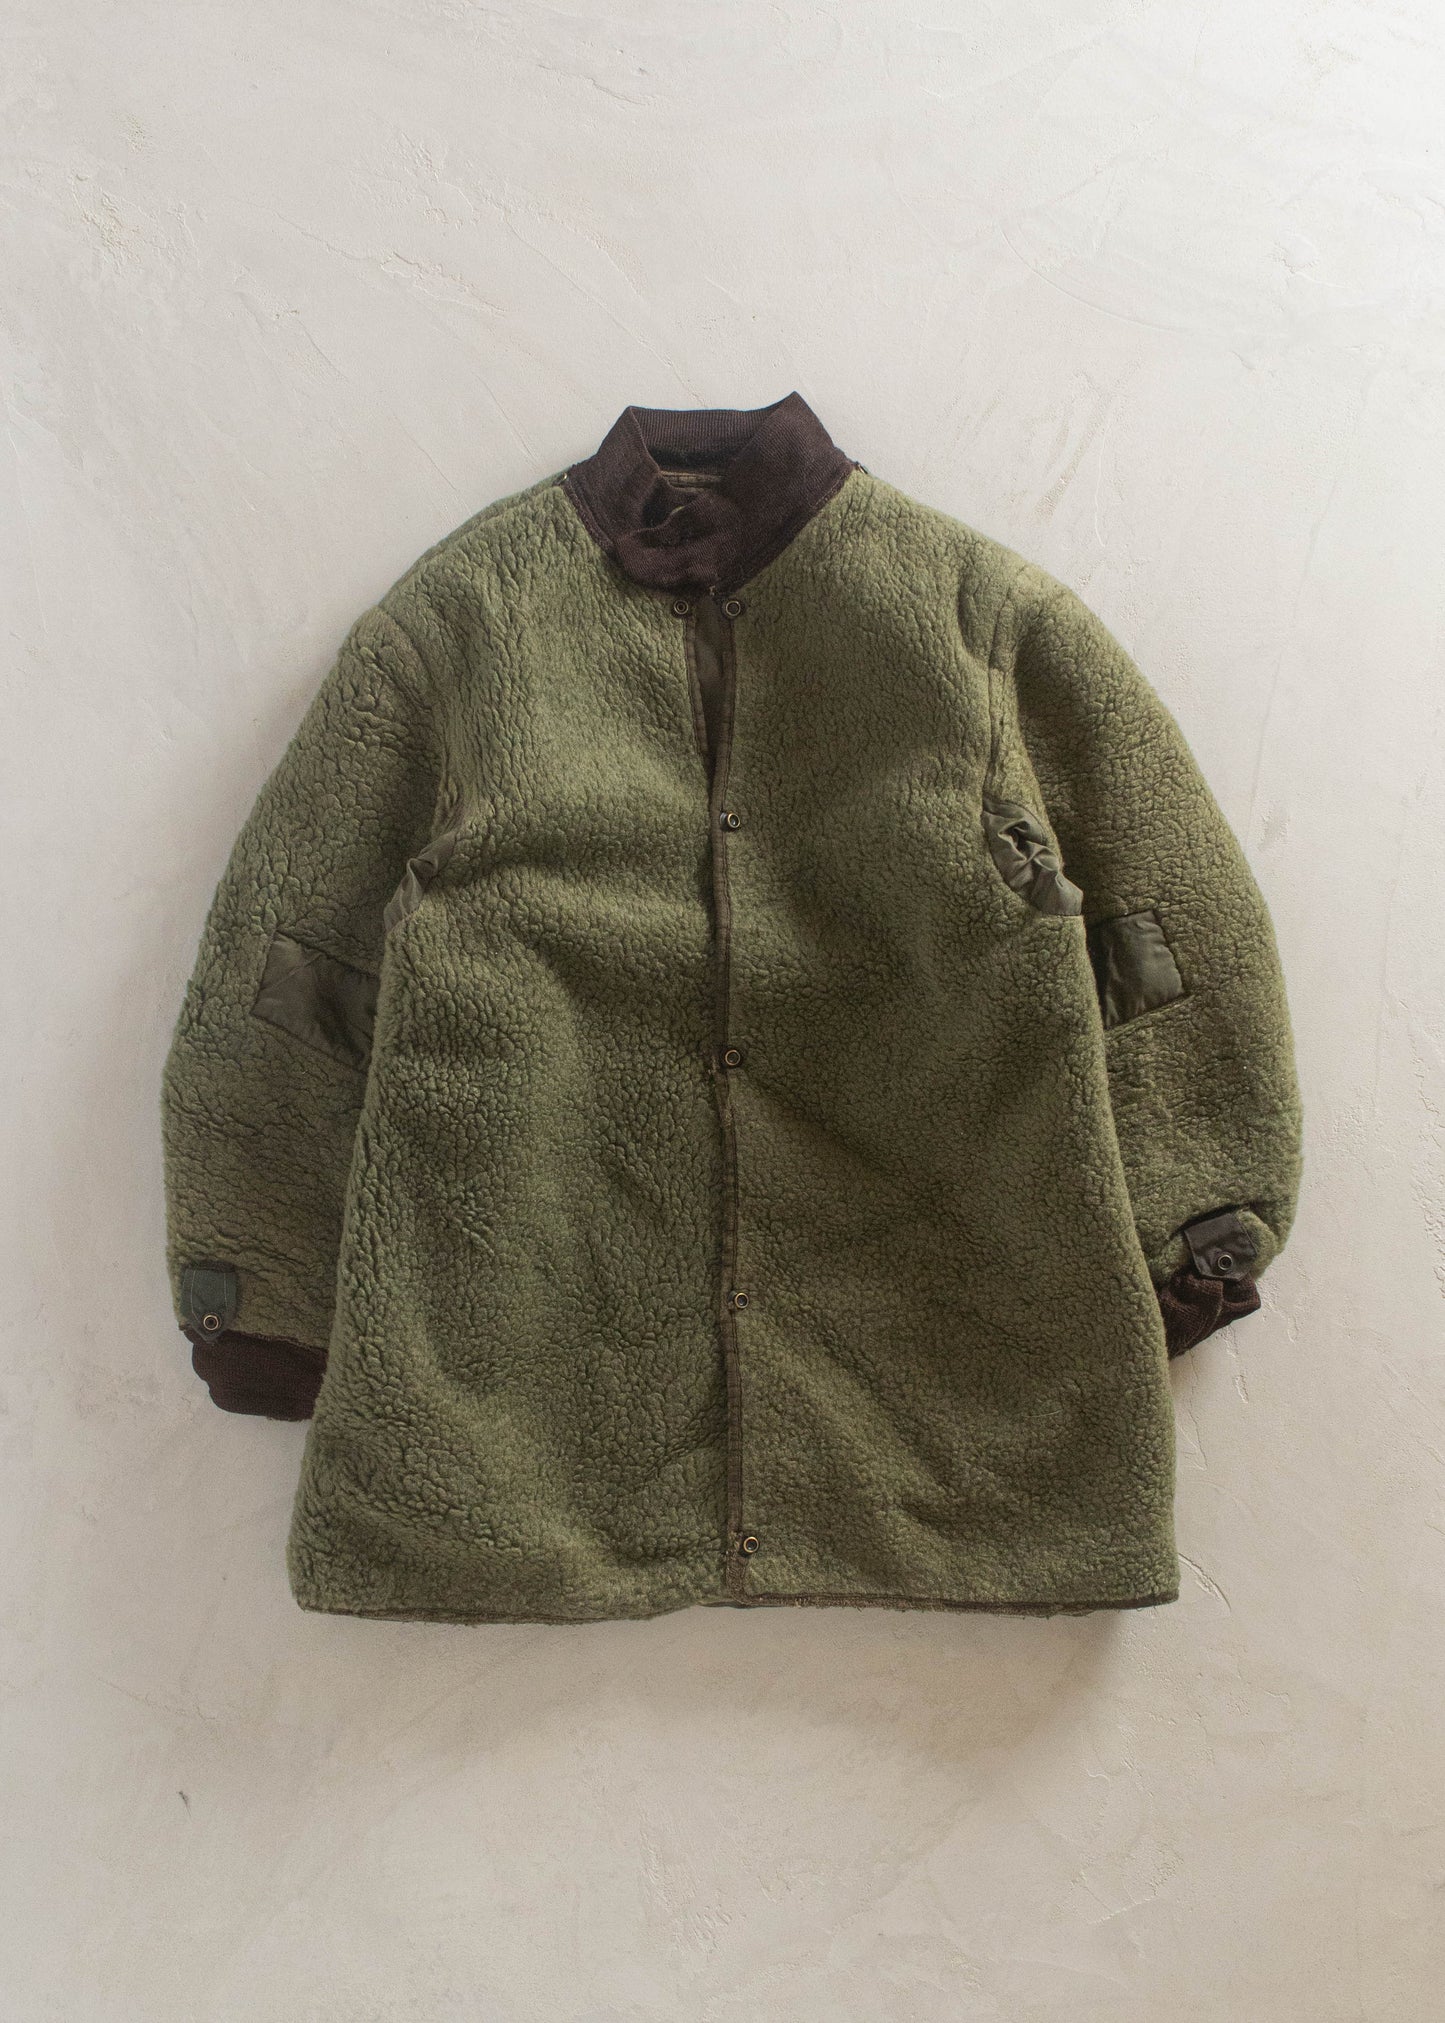 1980s Military Teddy Liner Jacket Size XS/S